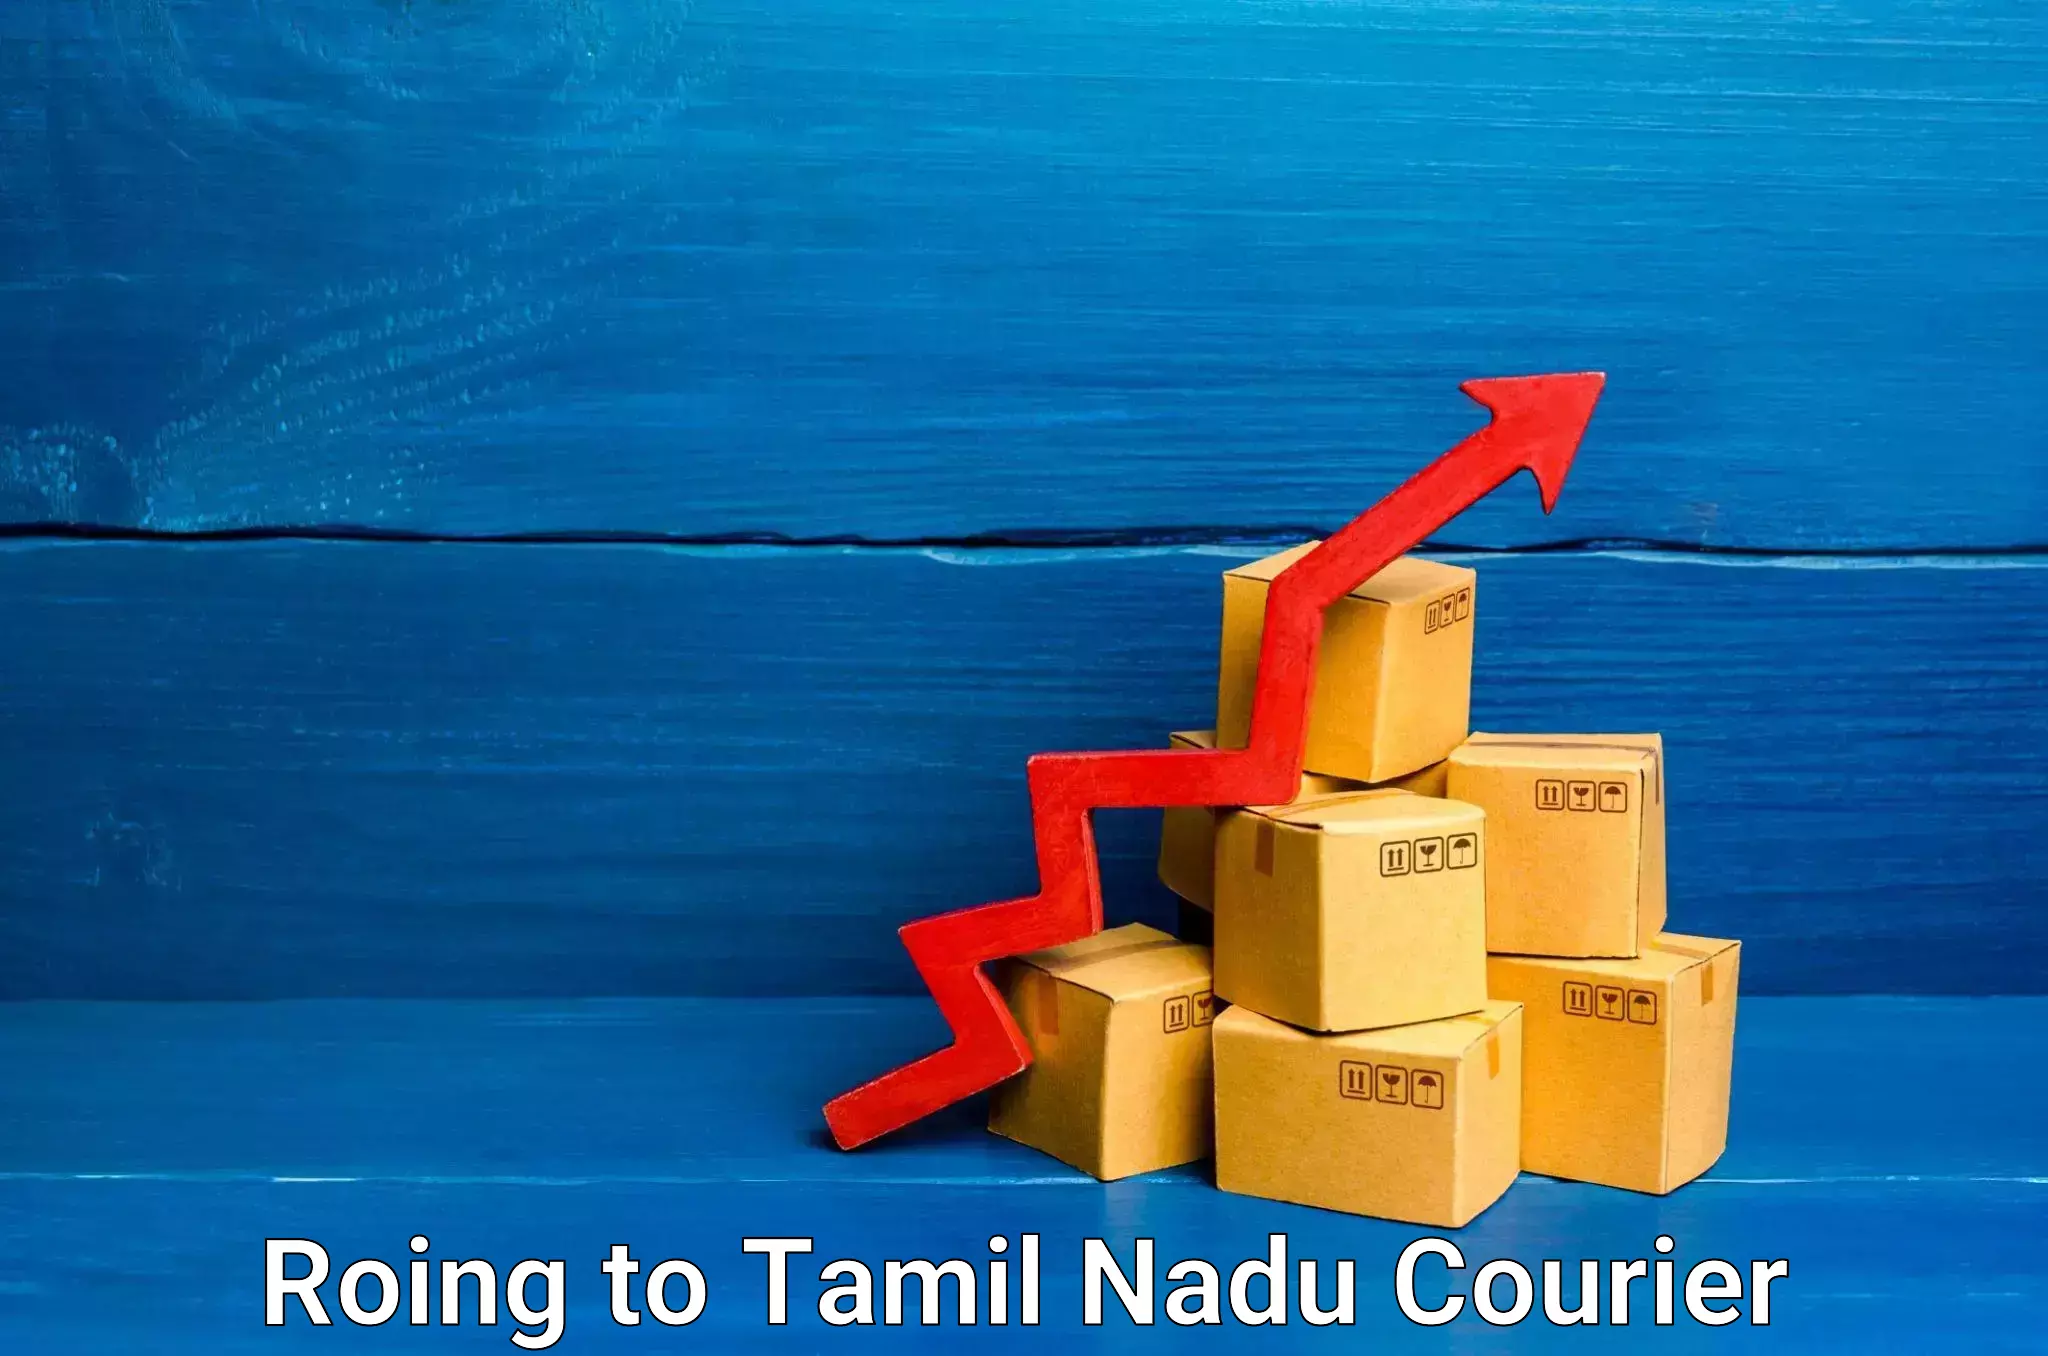 Advanced shipping network Roing to Tuticorin Port